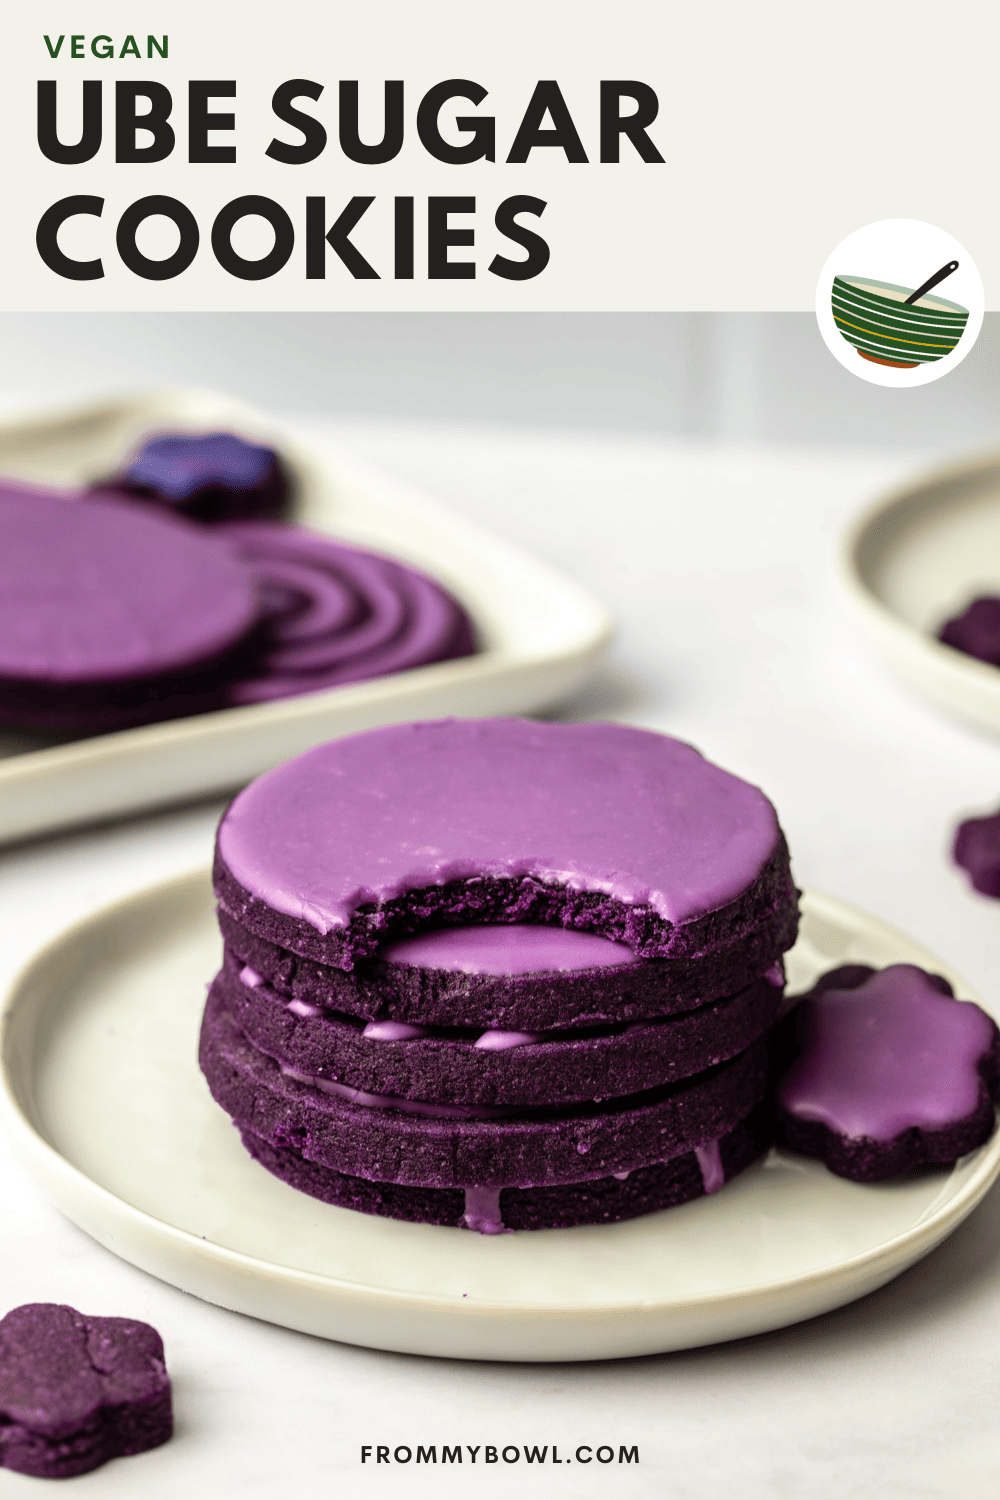 glazed ube sugar cookies stacked on top of each other and served in a white plate